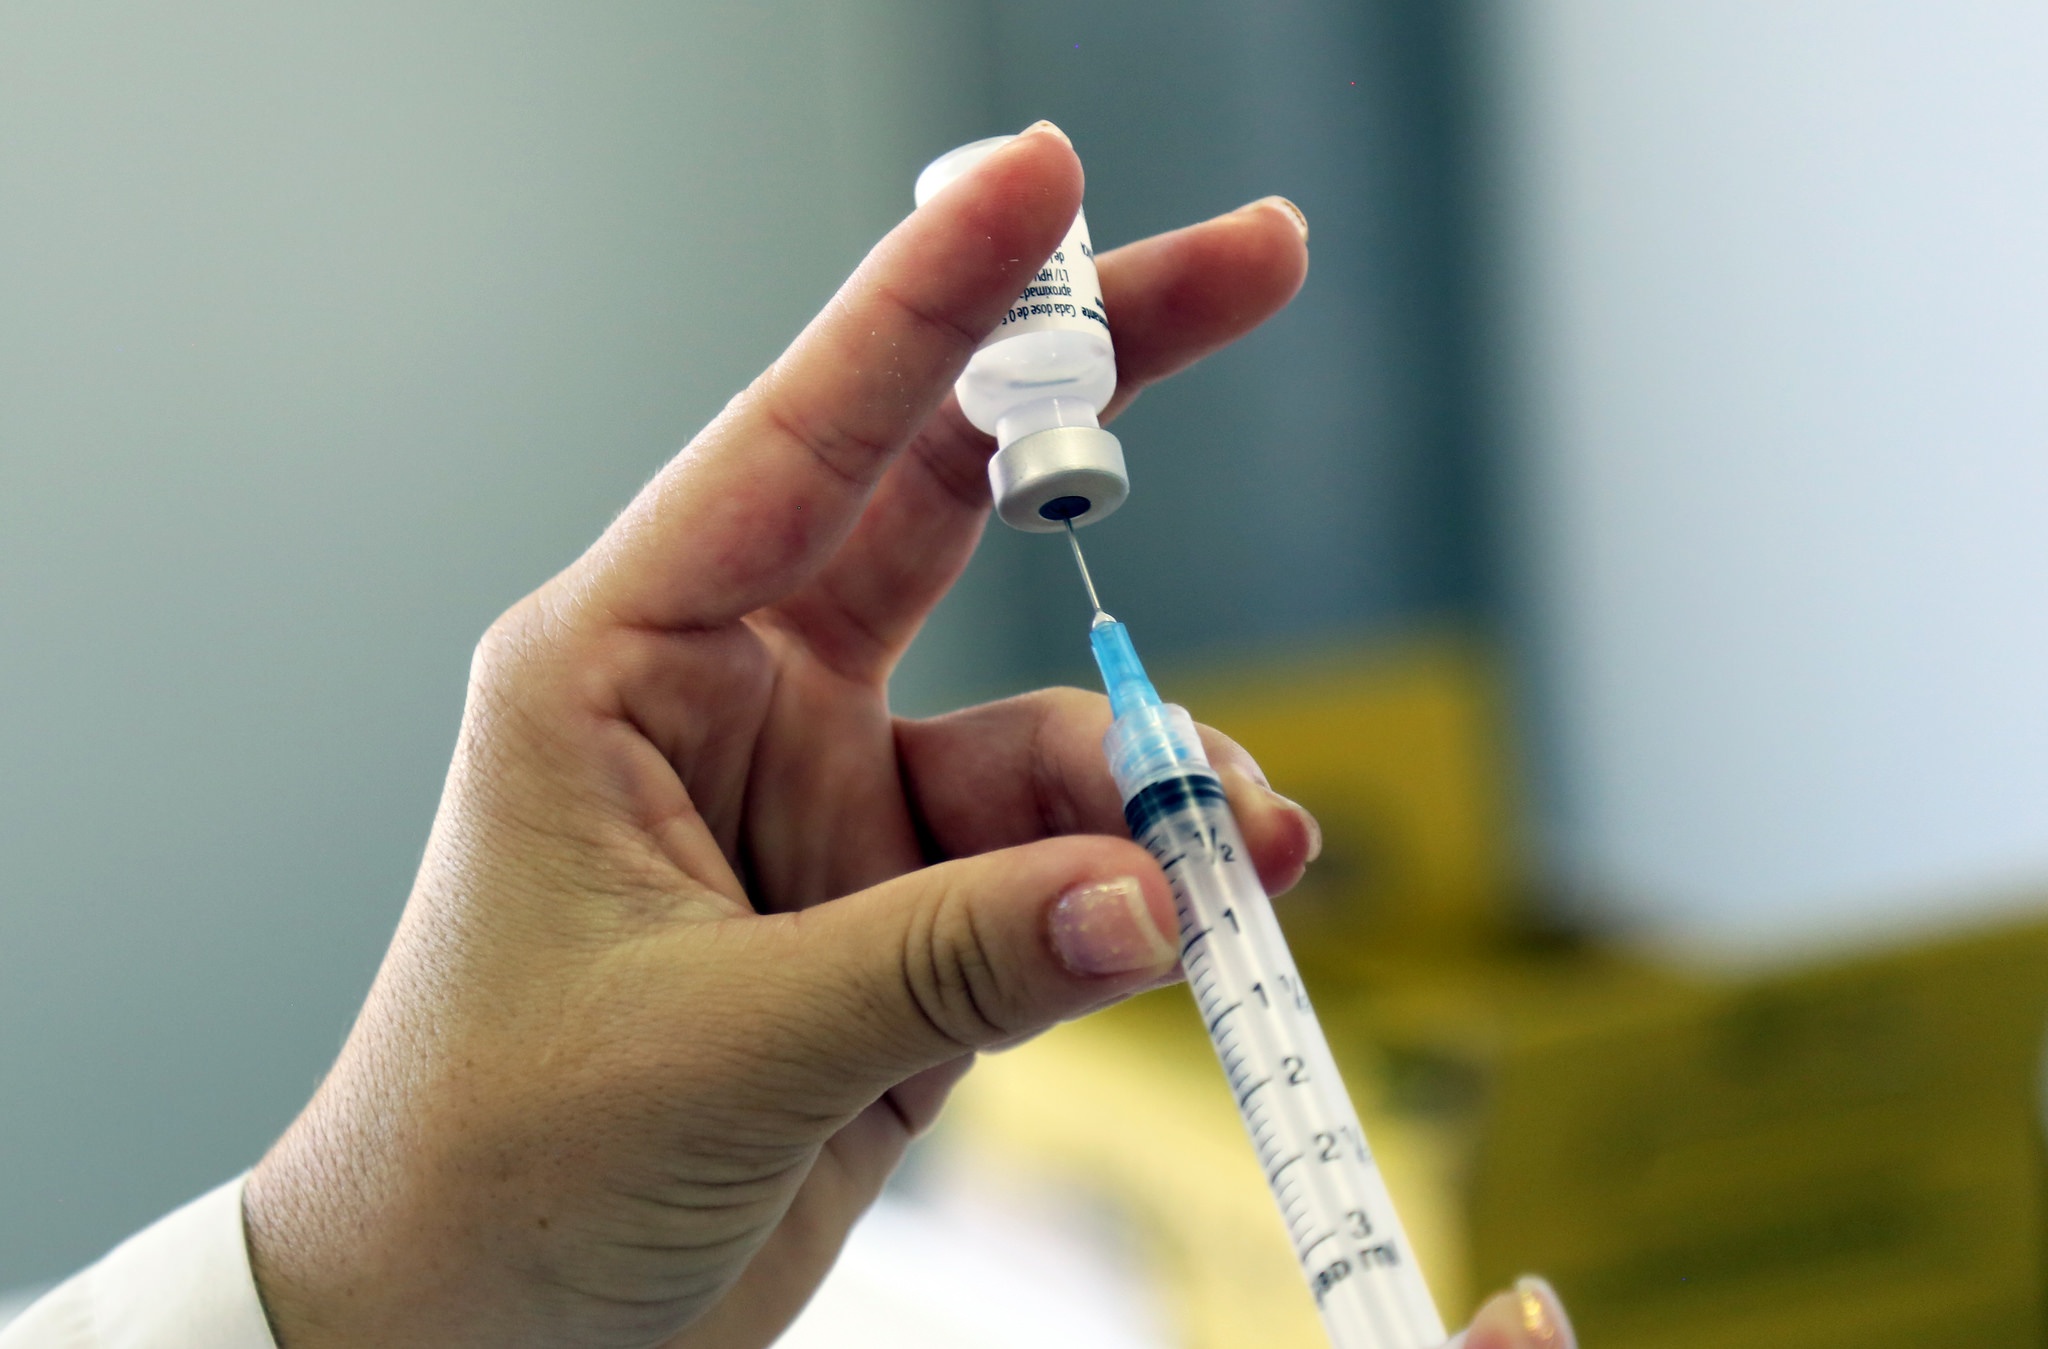 Universal Flu Vaccines: What Are the Chances?